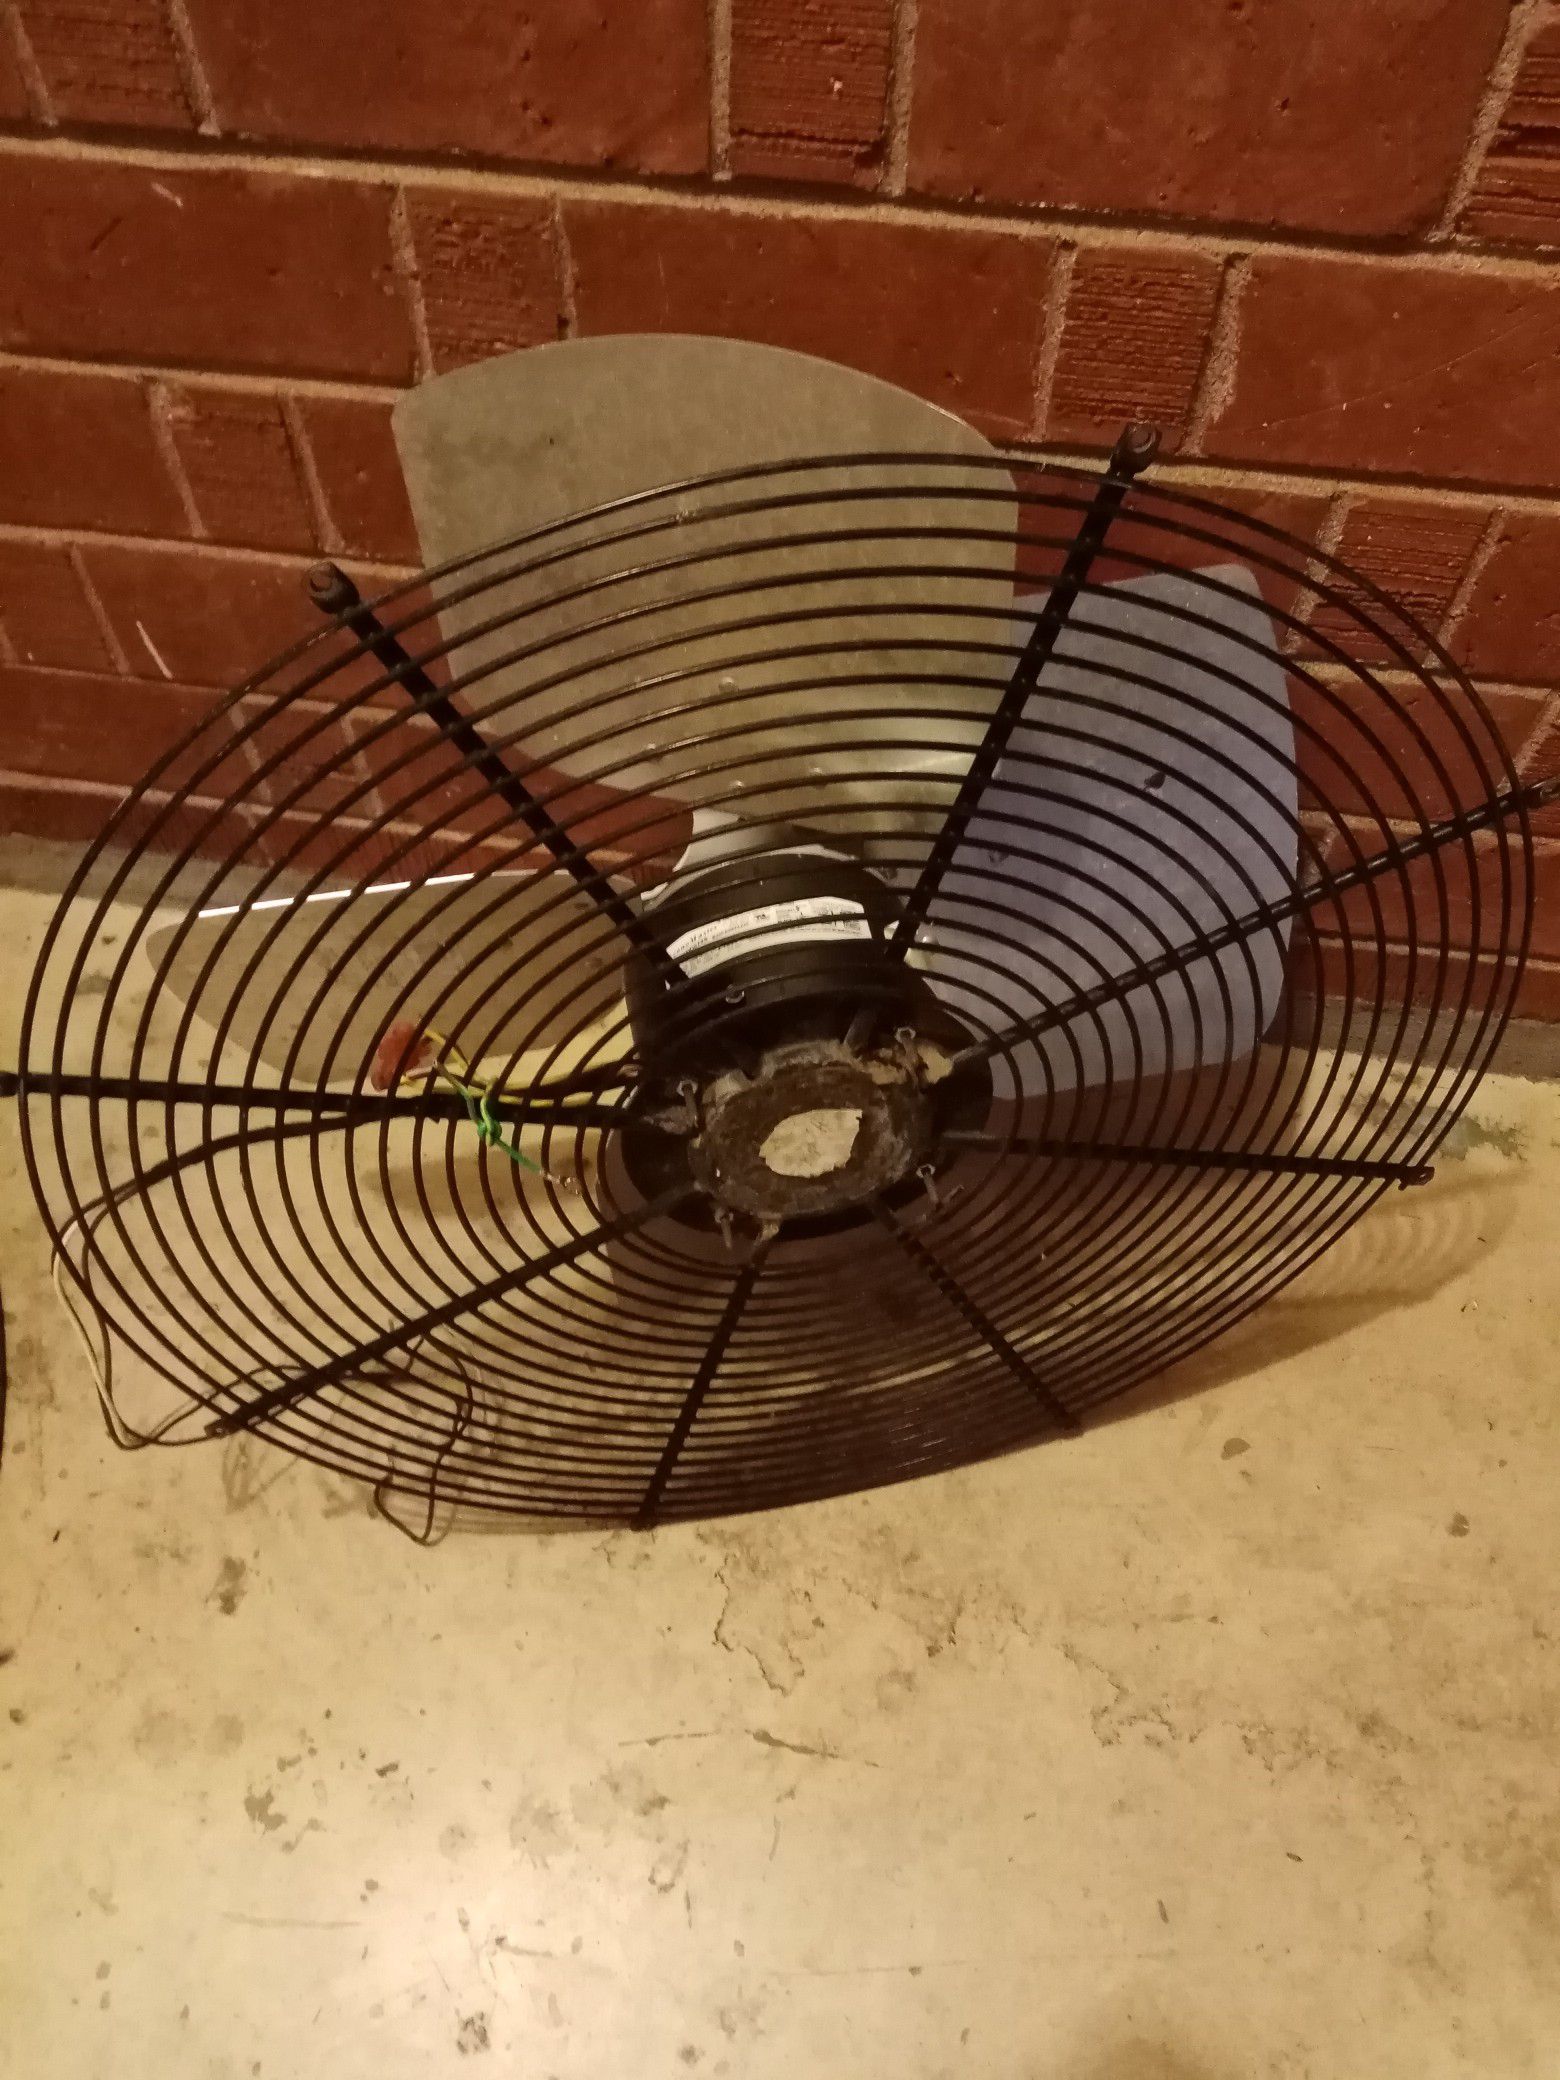 AC UNIT CONDENSER FAN MOTOR WITH CAPACITOR